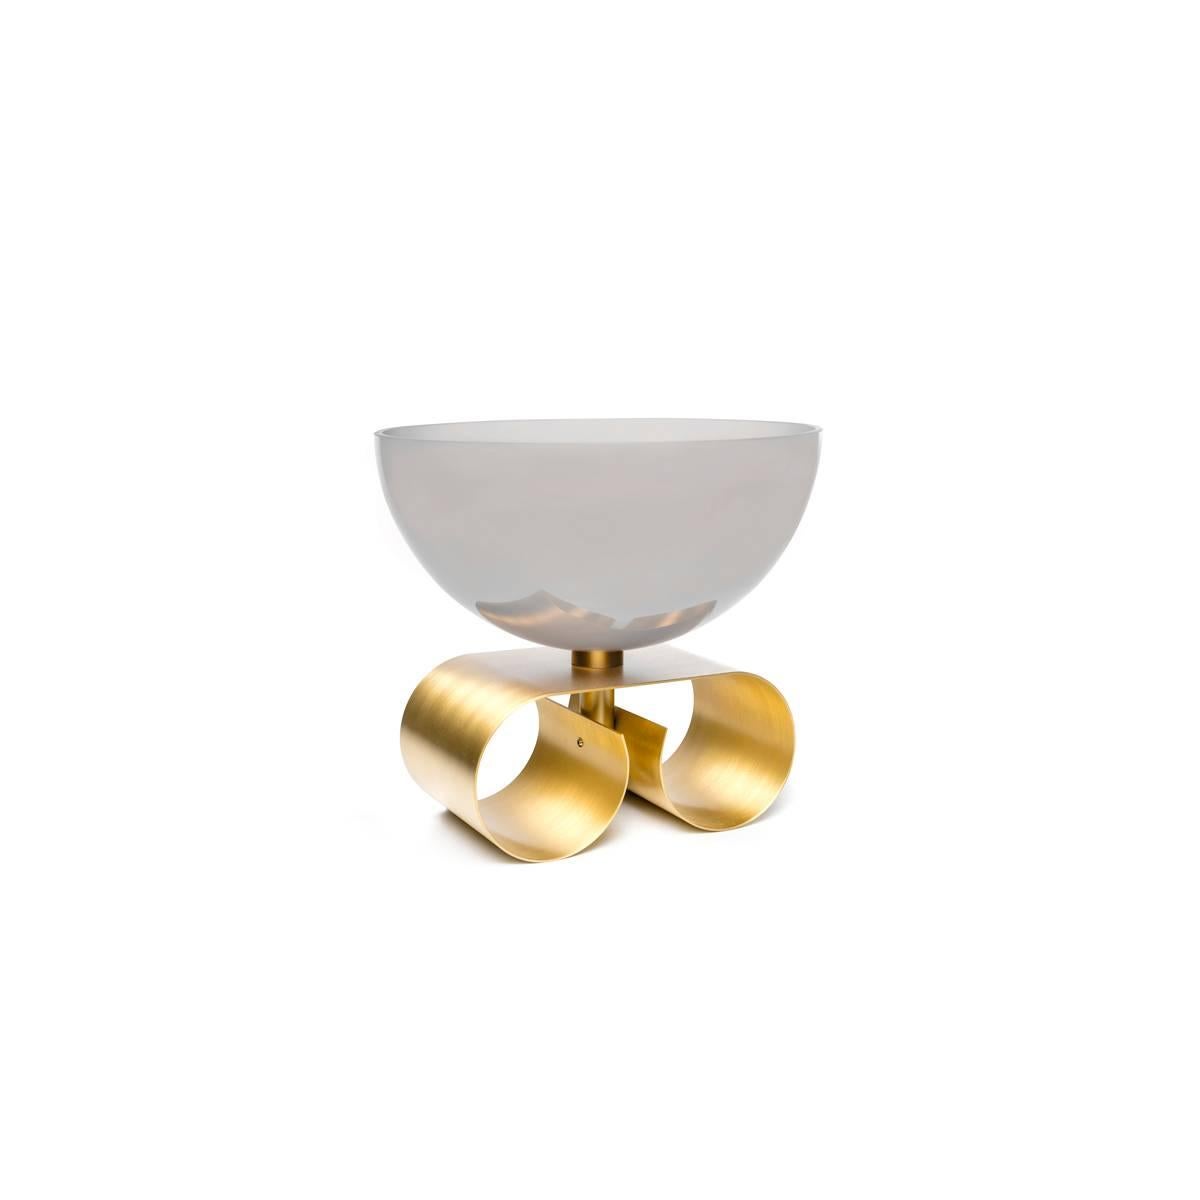 Parure I is a small glass bowl with brass base designed by Cristina Celestino, and it is part of Dolce Vita, a collection that celebrates in a contemporary tone the charmer of Italy in the 1950s in which you could taste the beauty of the objects and